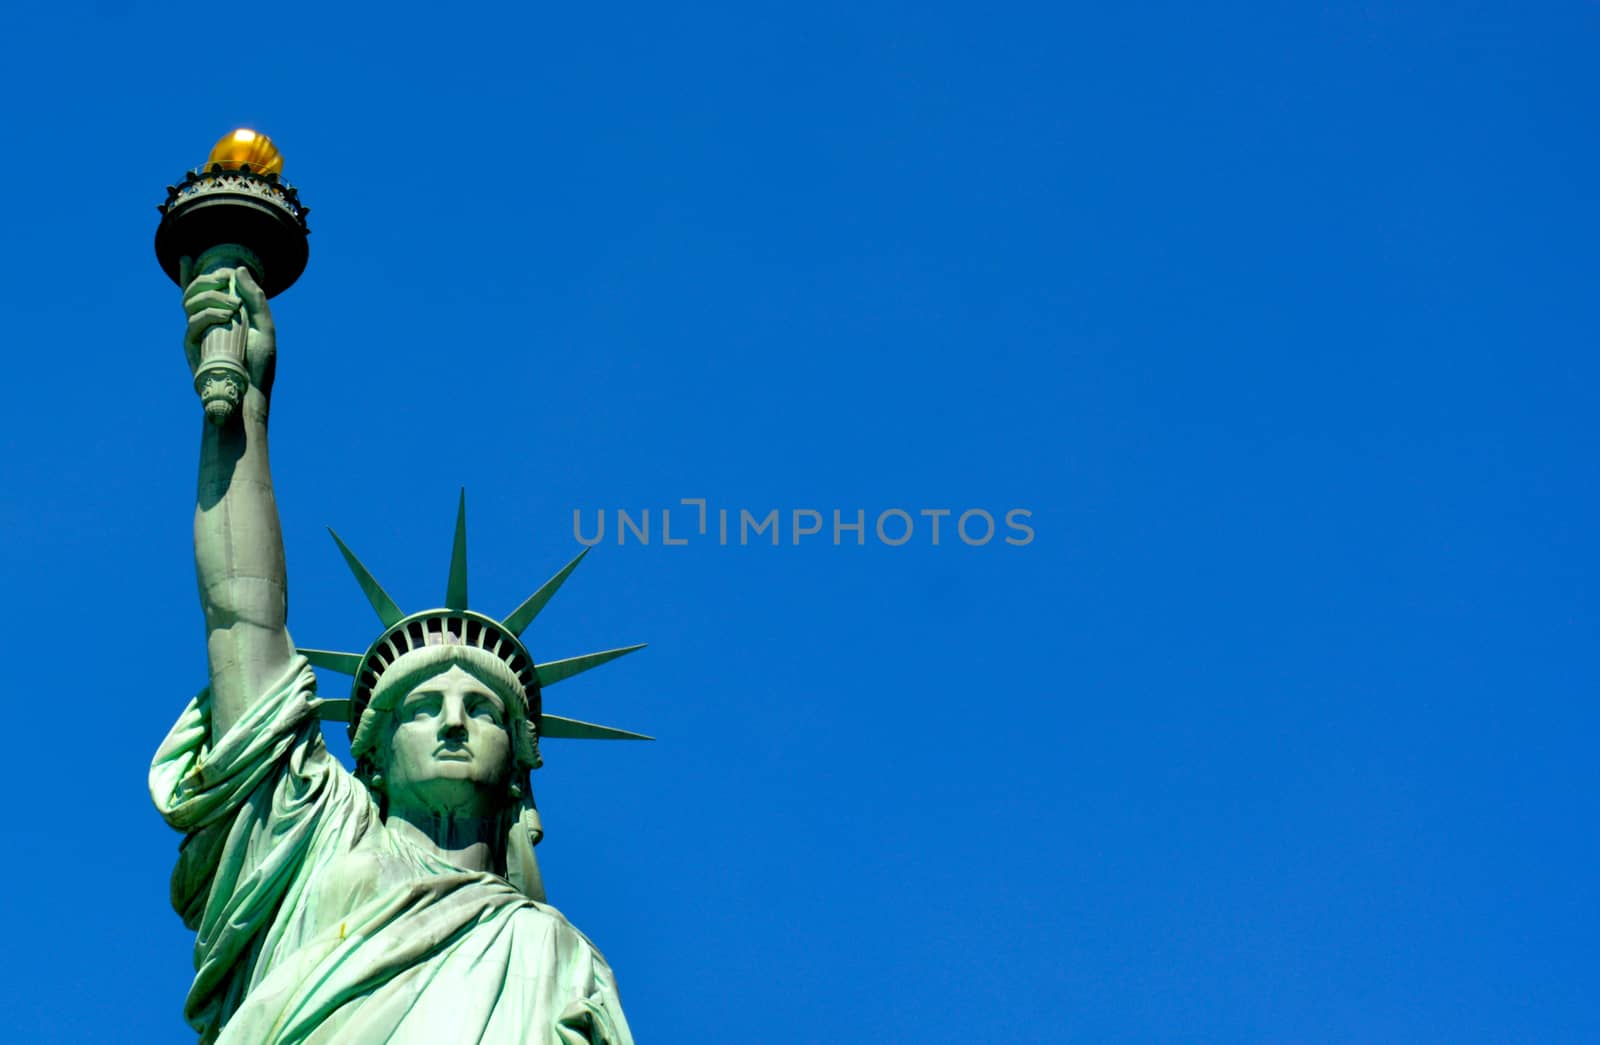 Statue of Liberty - New York City  - 10 by RefocusPhoto